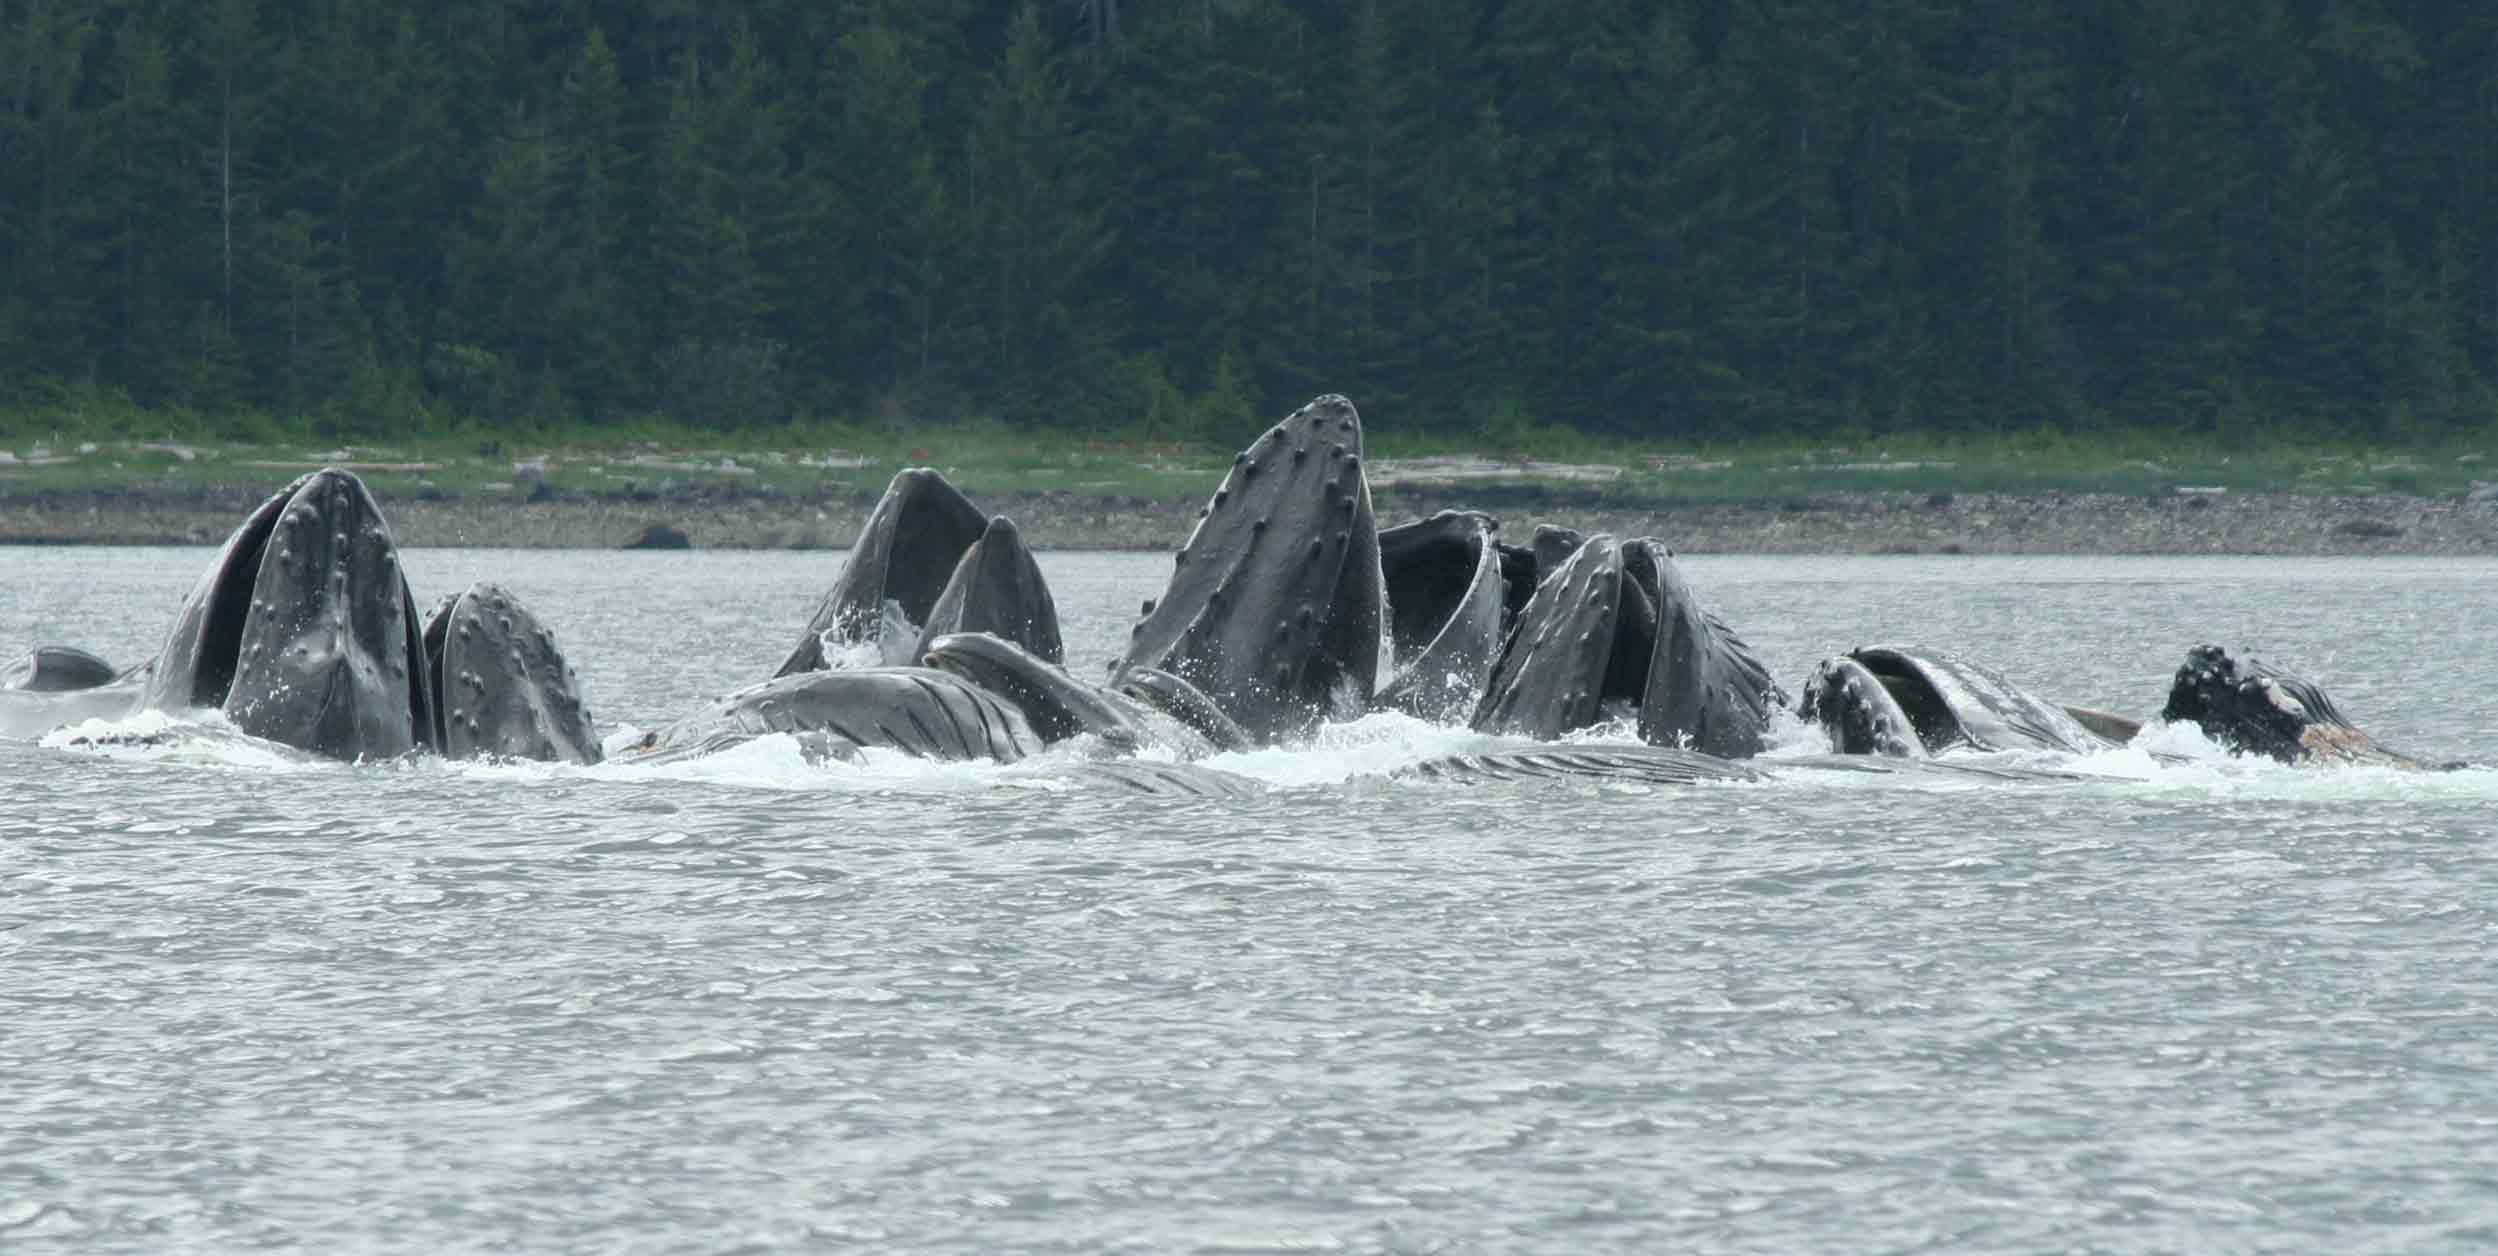 Herds of whales